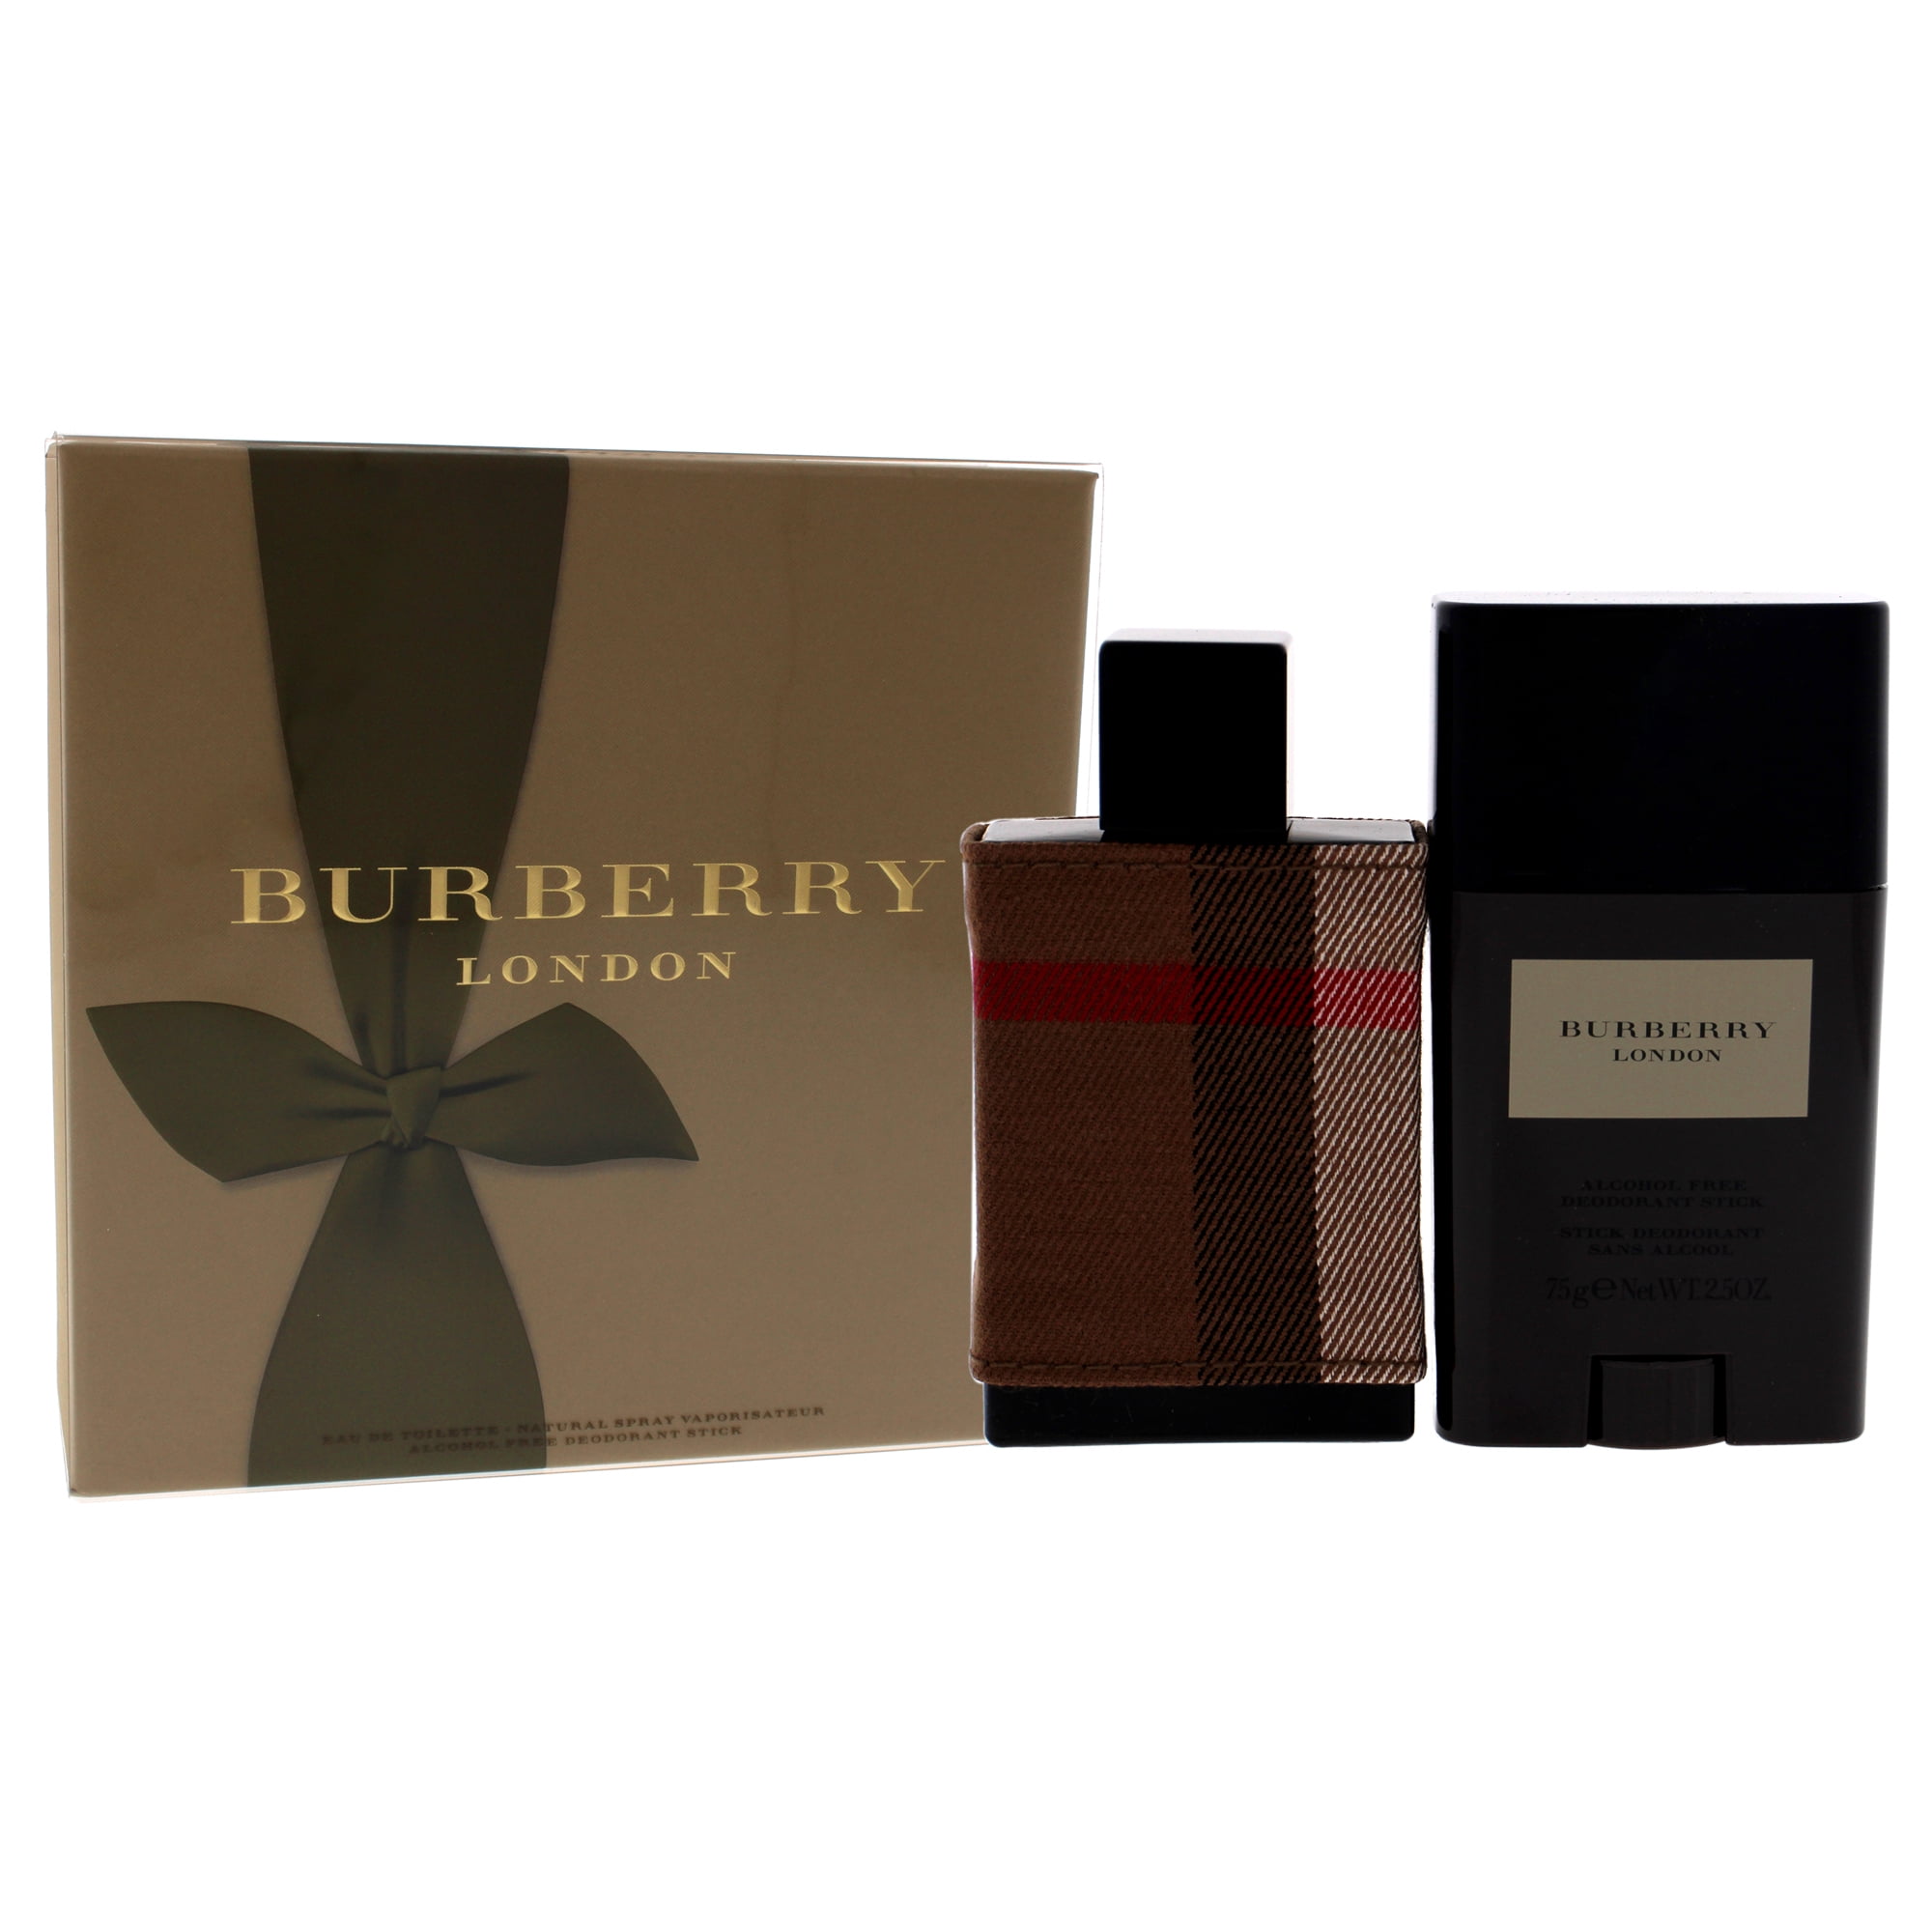 burberry cologne gift set